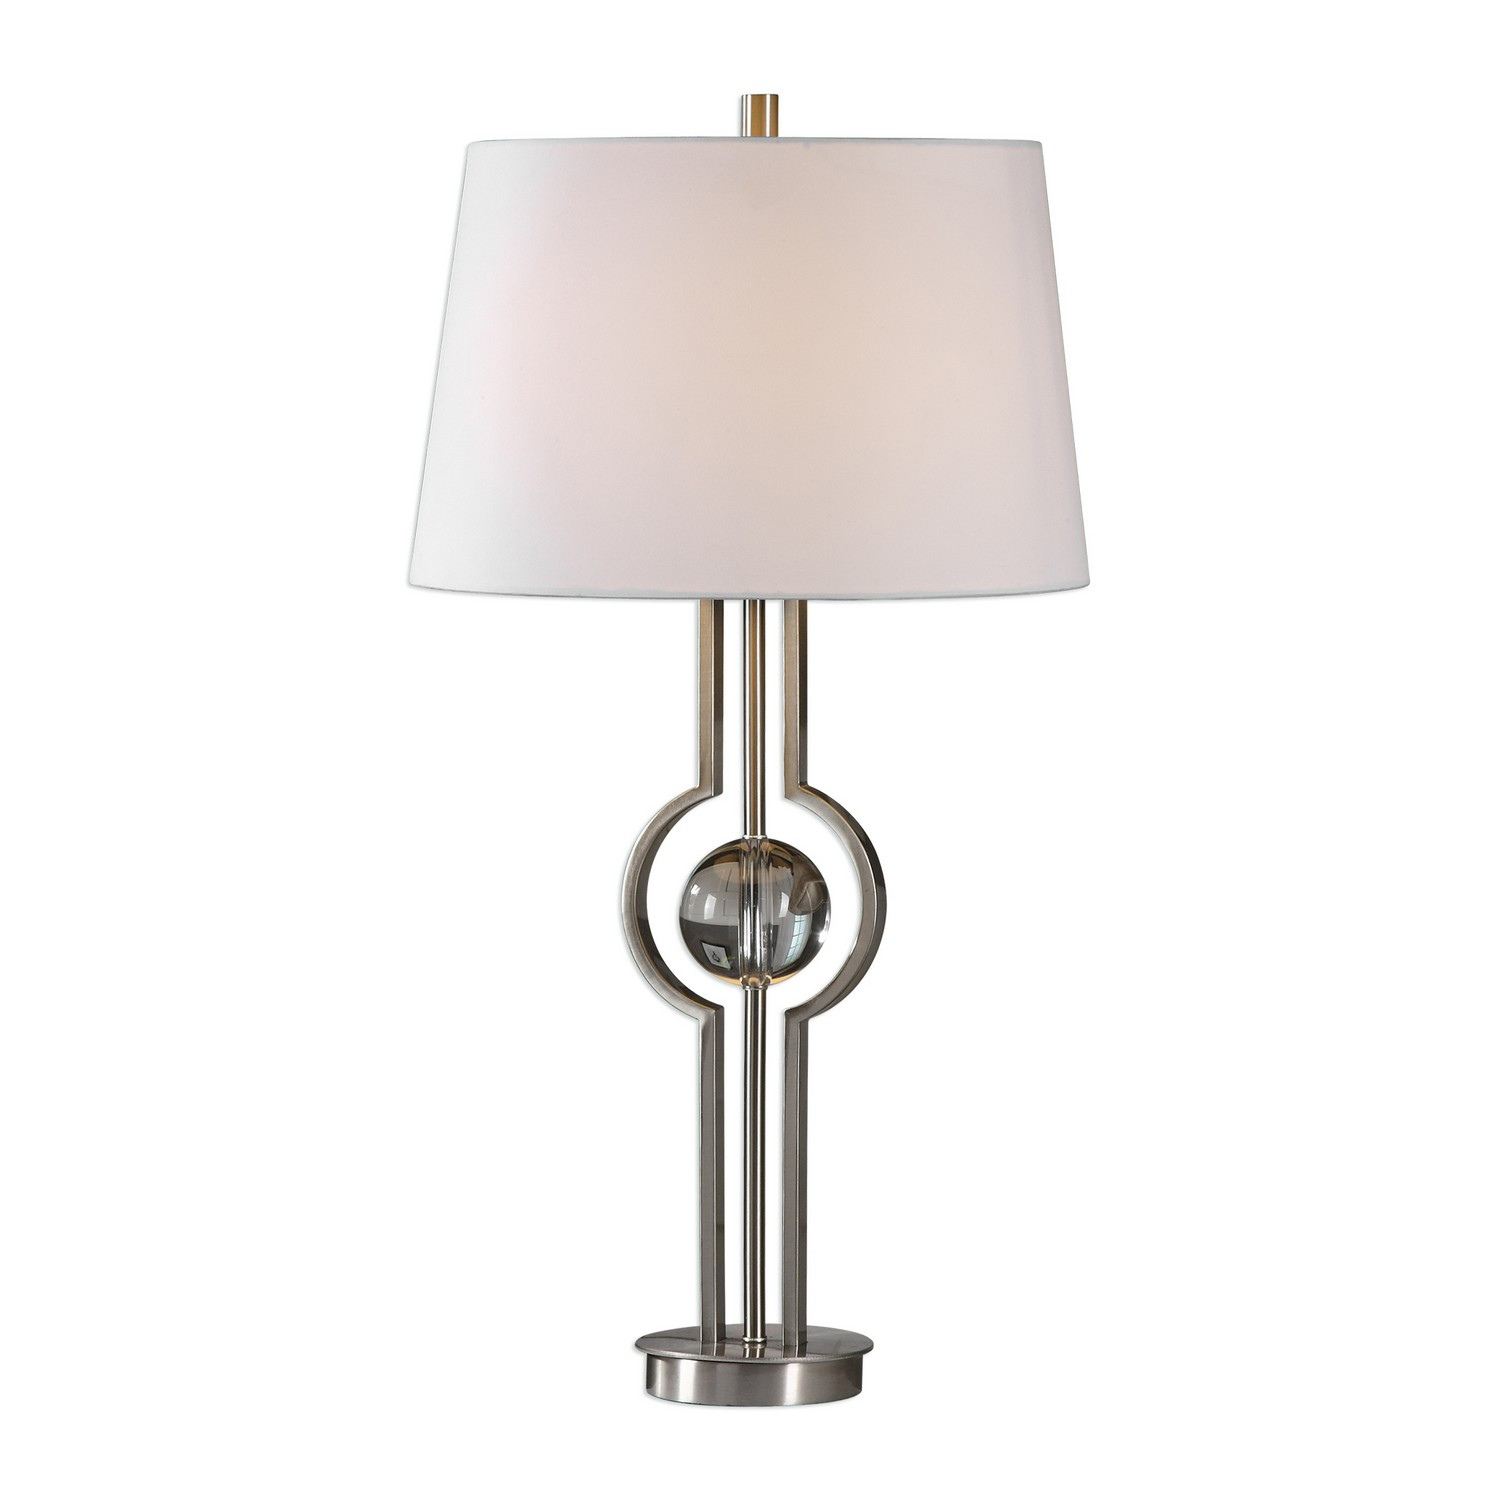 Uttermost W26003-1 Table Lamp - Brushed Nickel